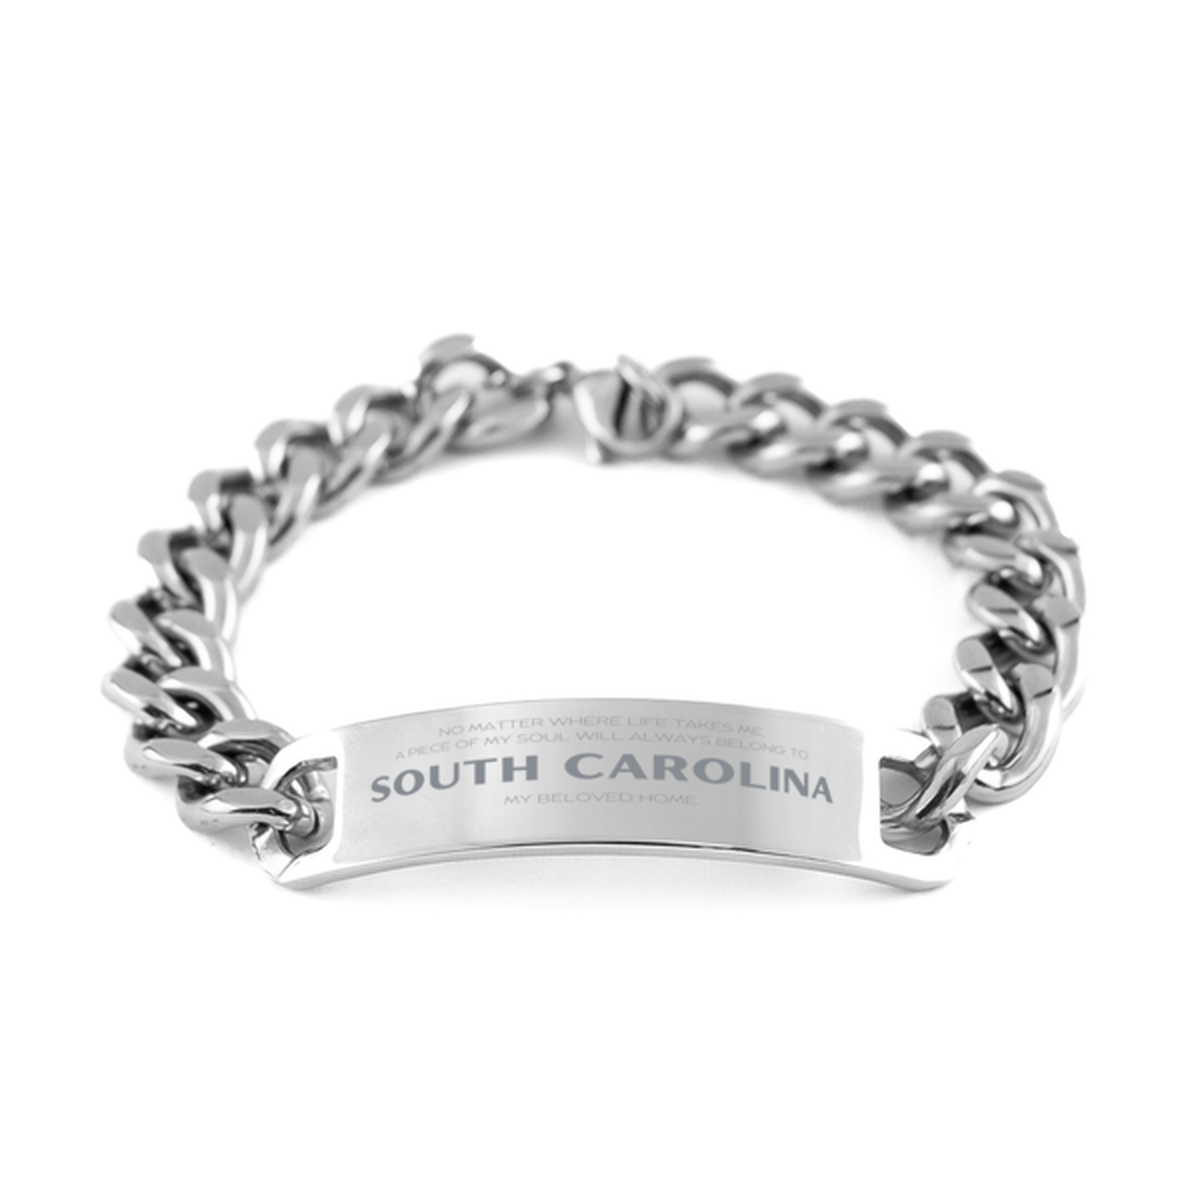 Love South Carolina State Gifts, My soul will always belong to South Carolina, Proud Cuban Chain Stainless Steel Bracelet, Birthday Unique Gifts For South Carolina Men, Women, Friends